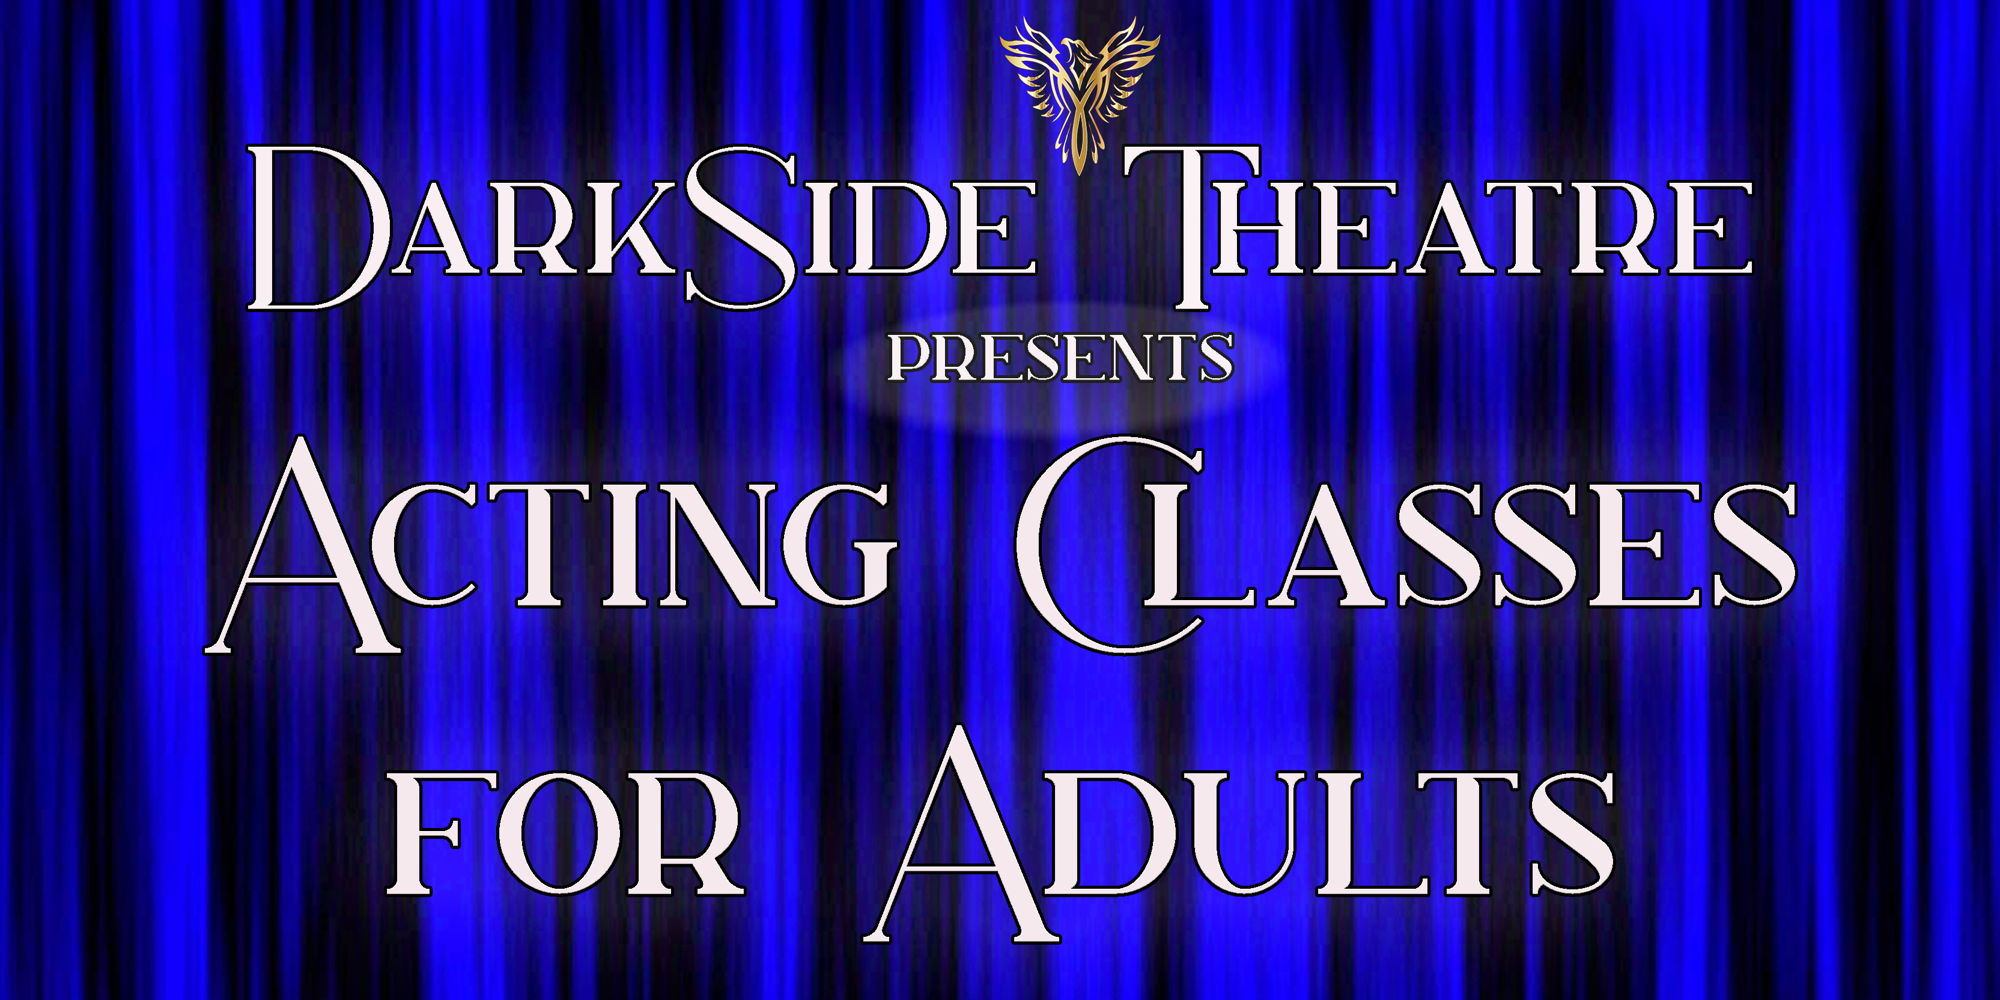 Acting Classes for Adults promotional image